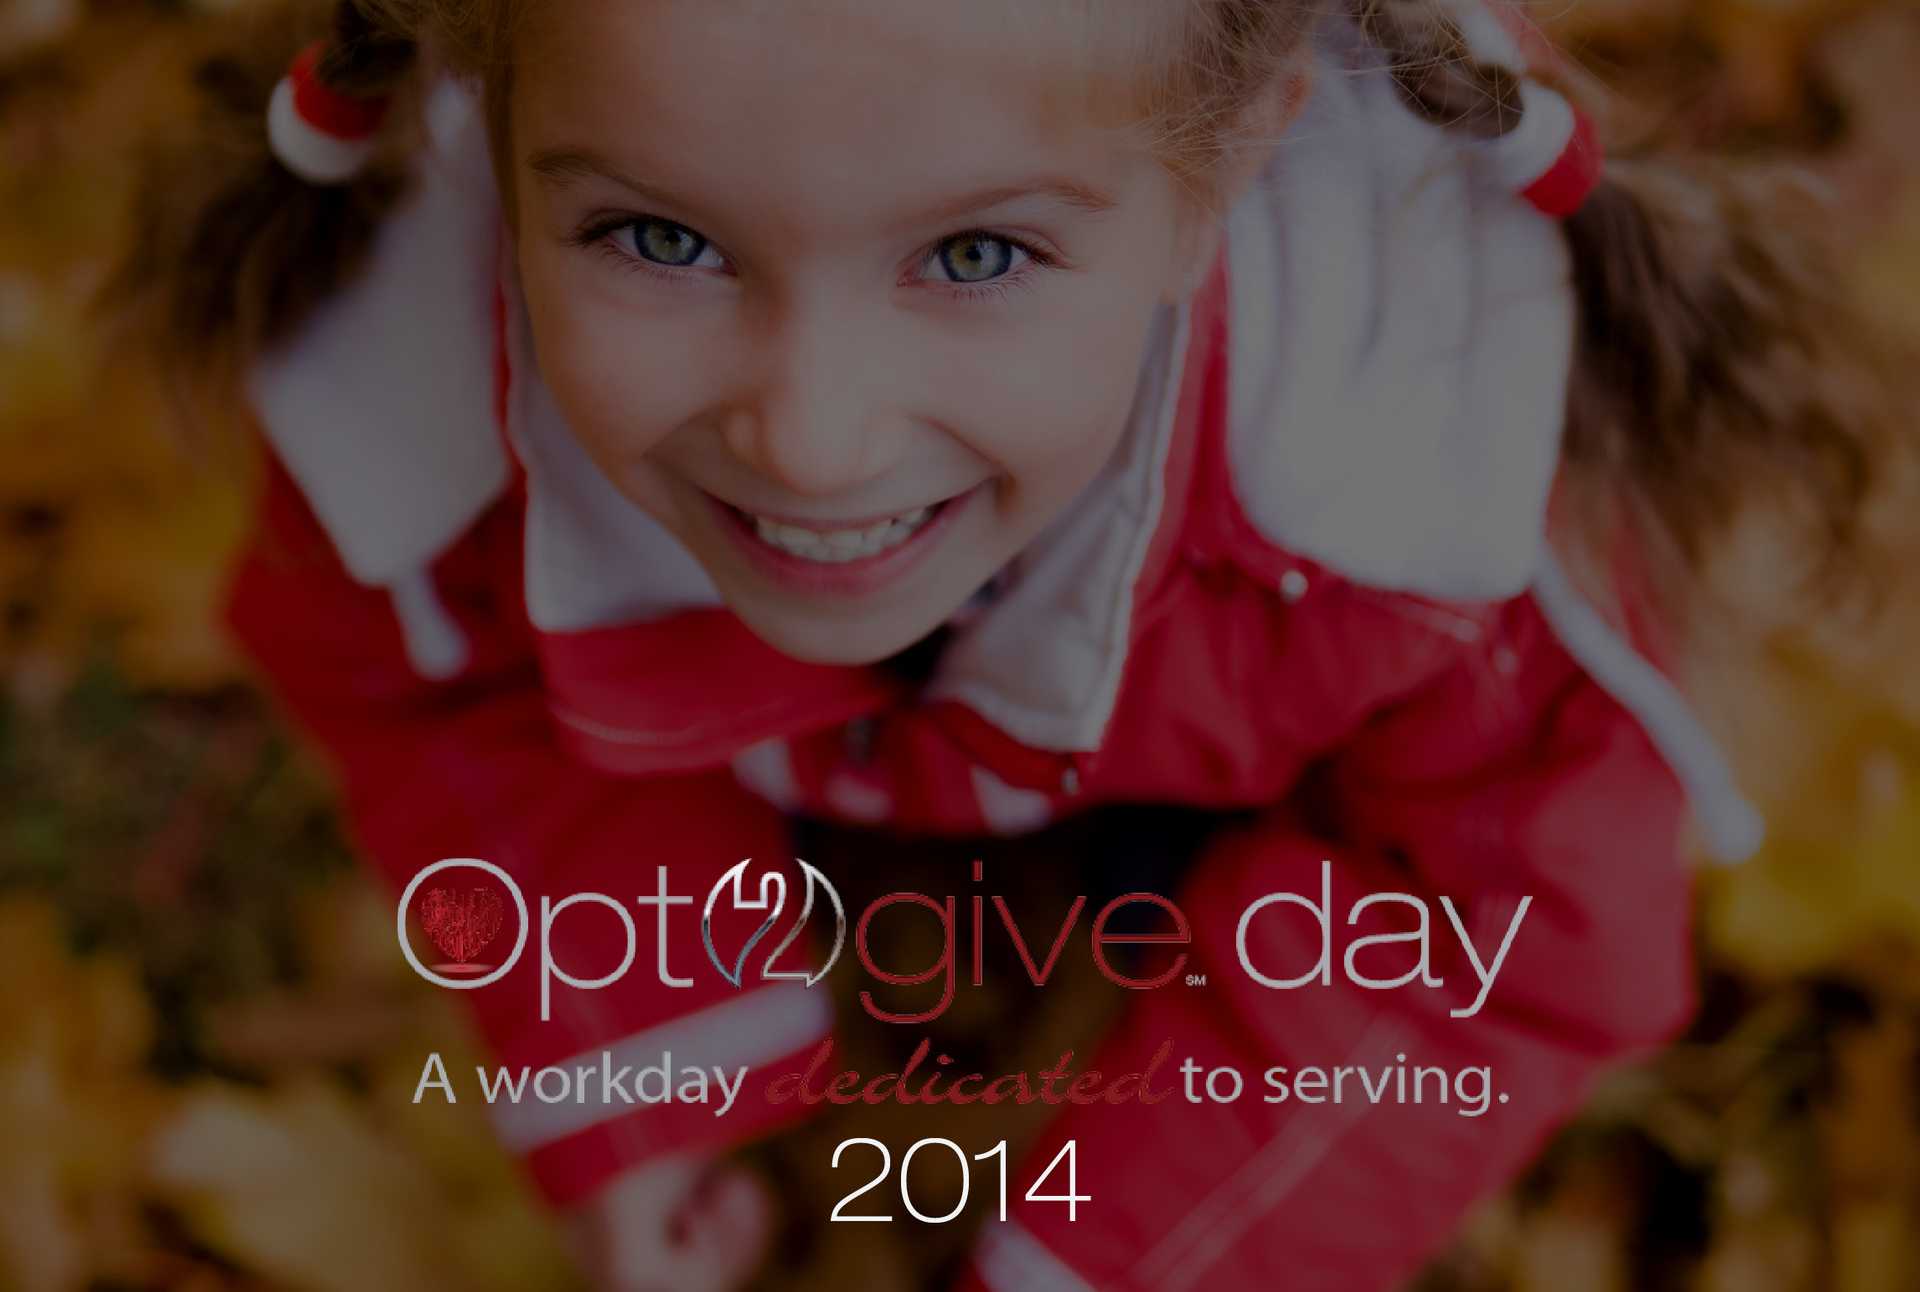 Optomi Dallas Mentored Kids at the Good Elementary School on Opt2Give Day 2014